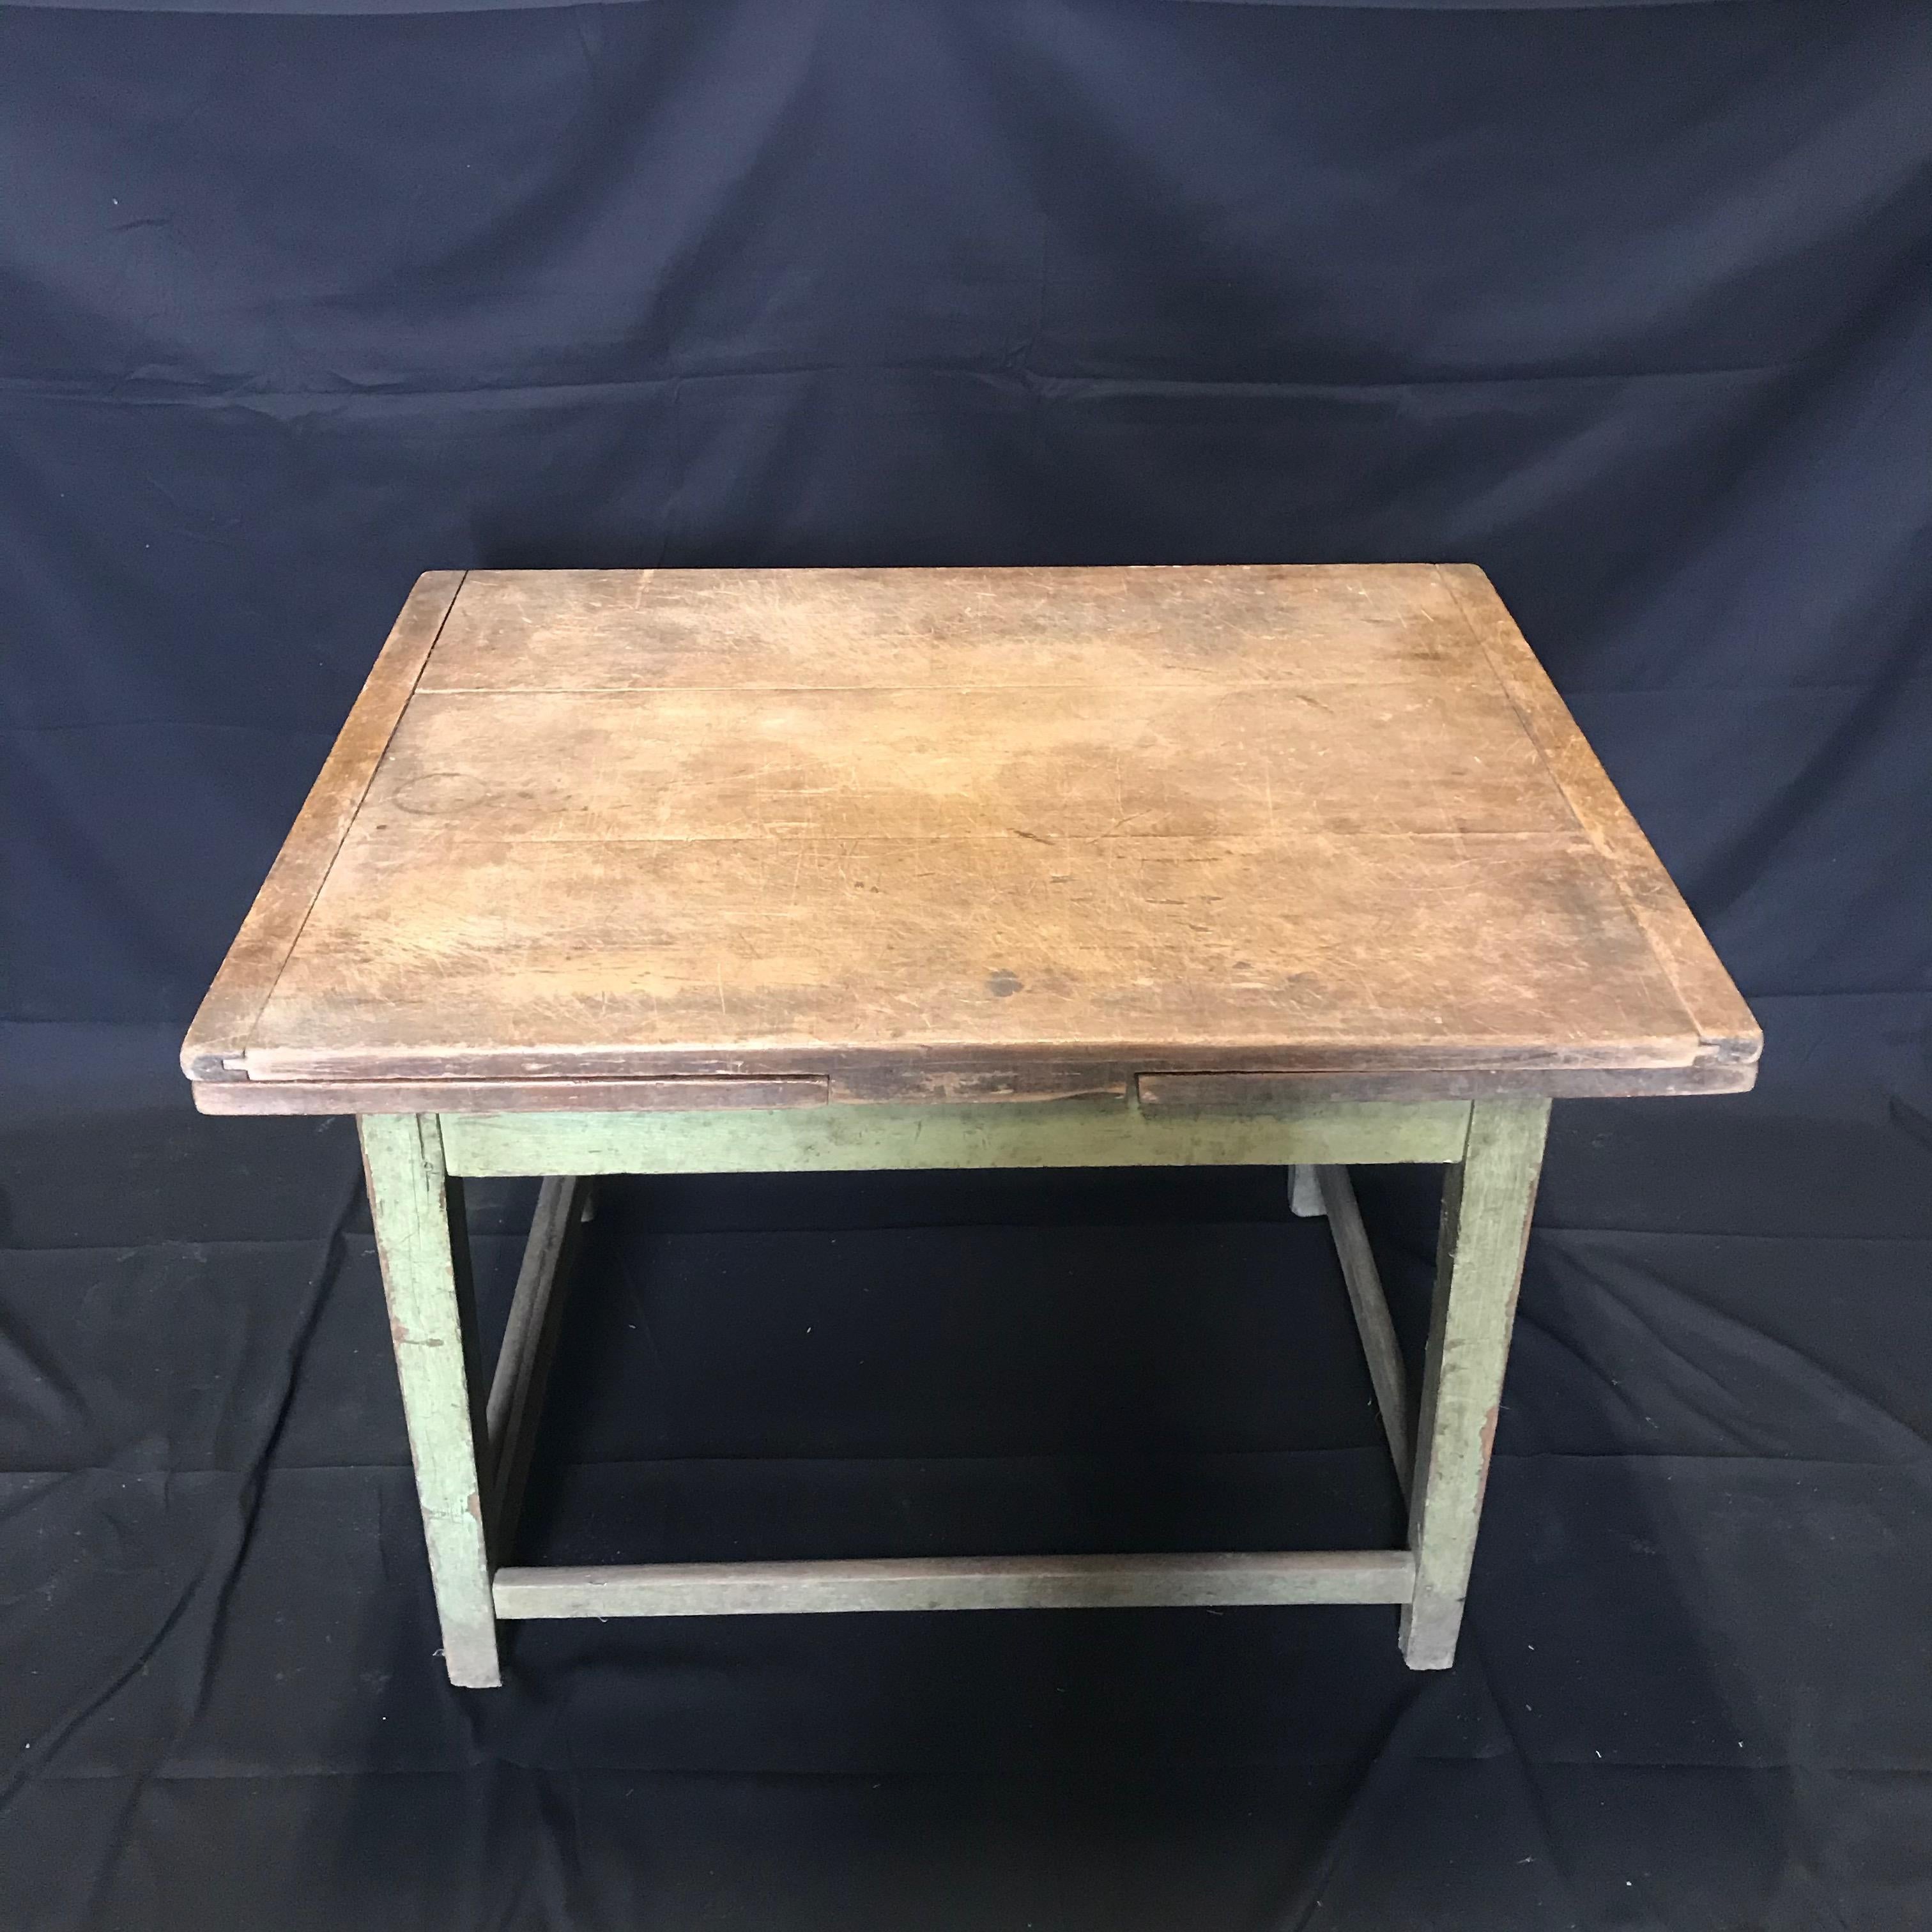 French Provincial French Country Rustic Extendable Antique Farm Table with Original Paint